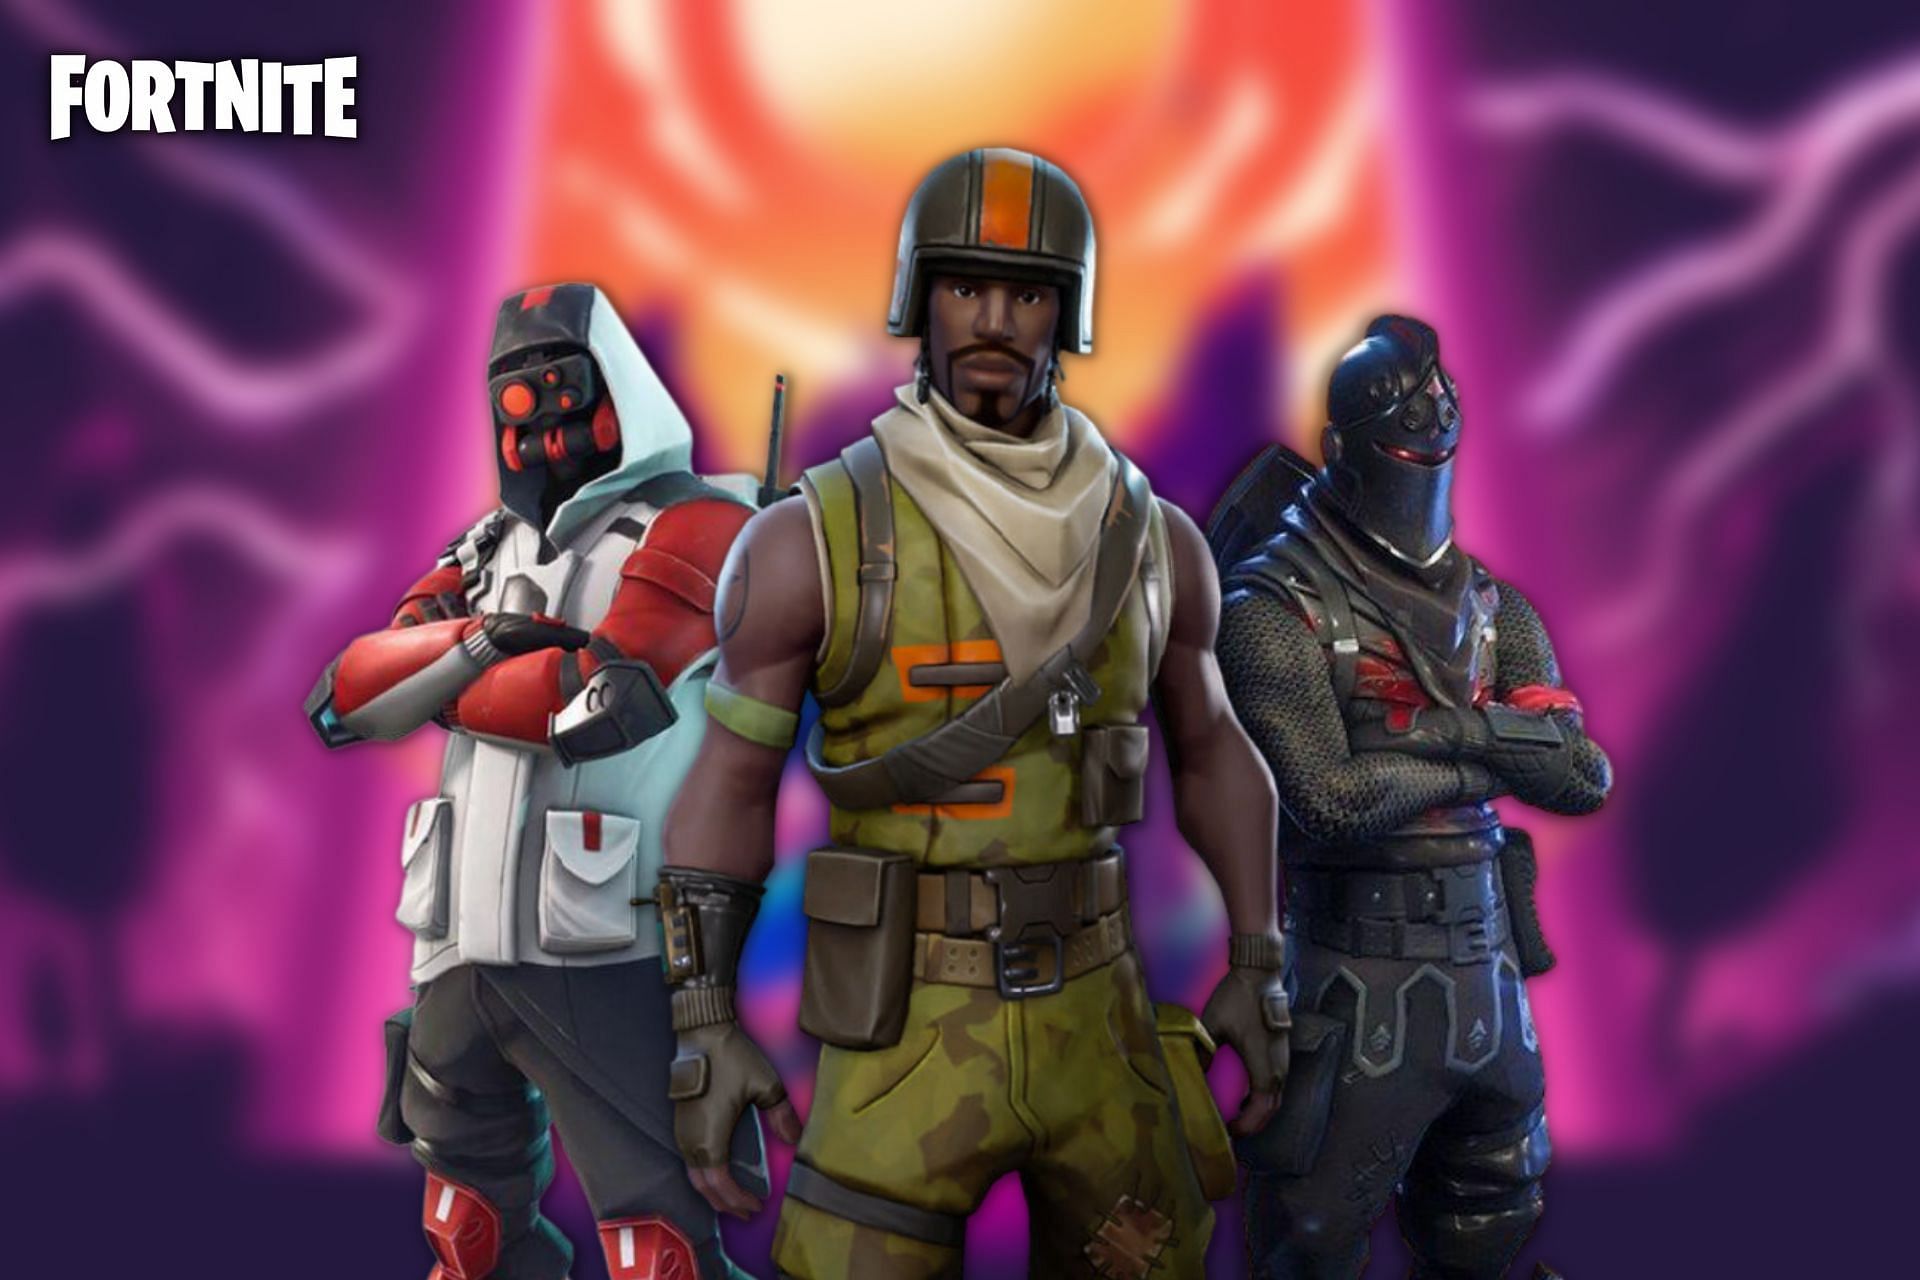 6 Fortnite Skins That Give Their Owners The Right To Flex